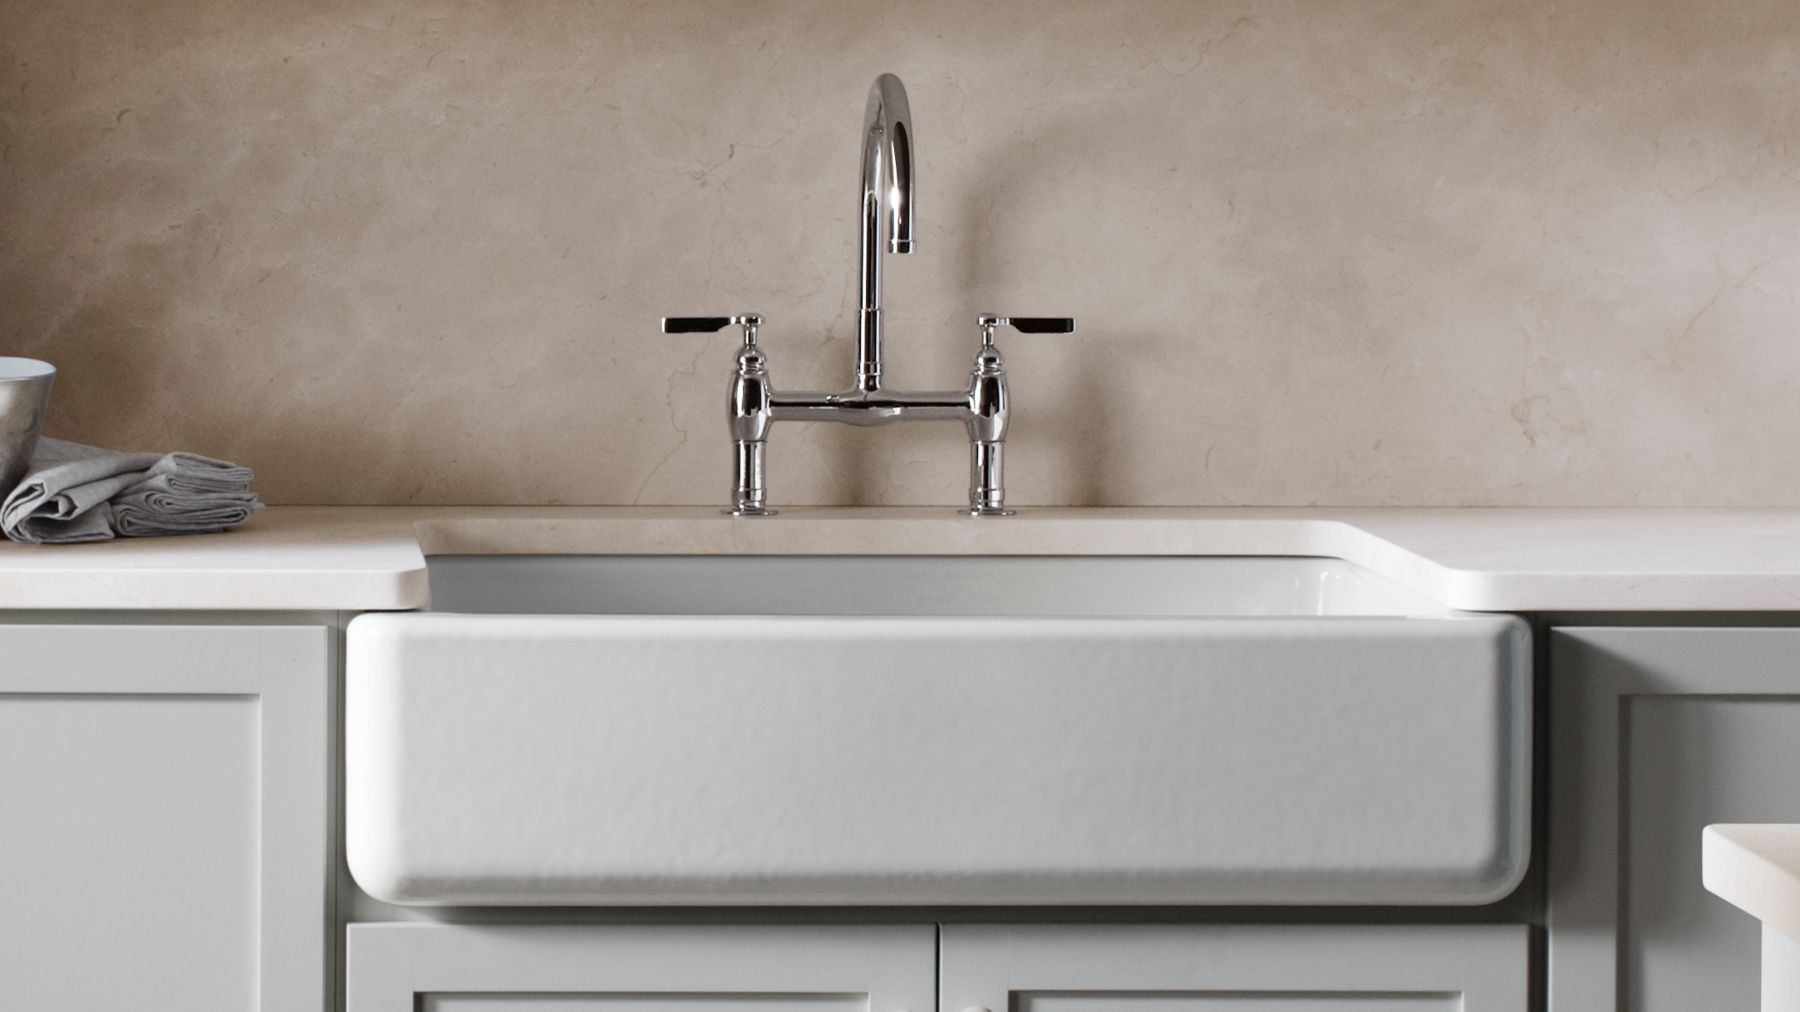 Things To Consider As You Choose Your Kitchen Sink: